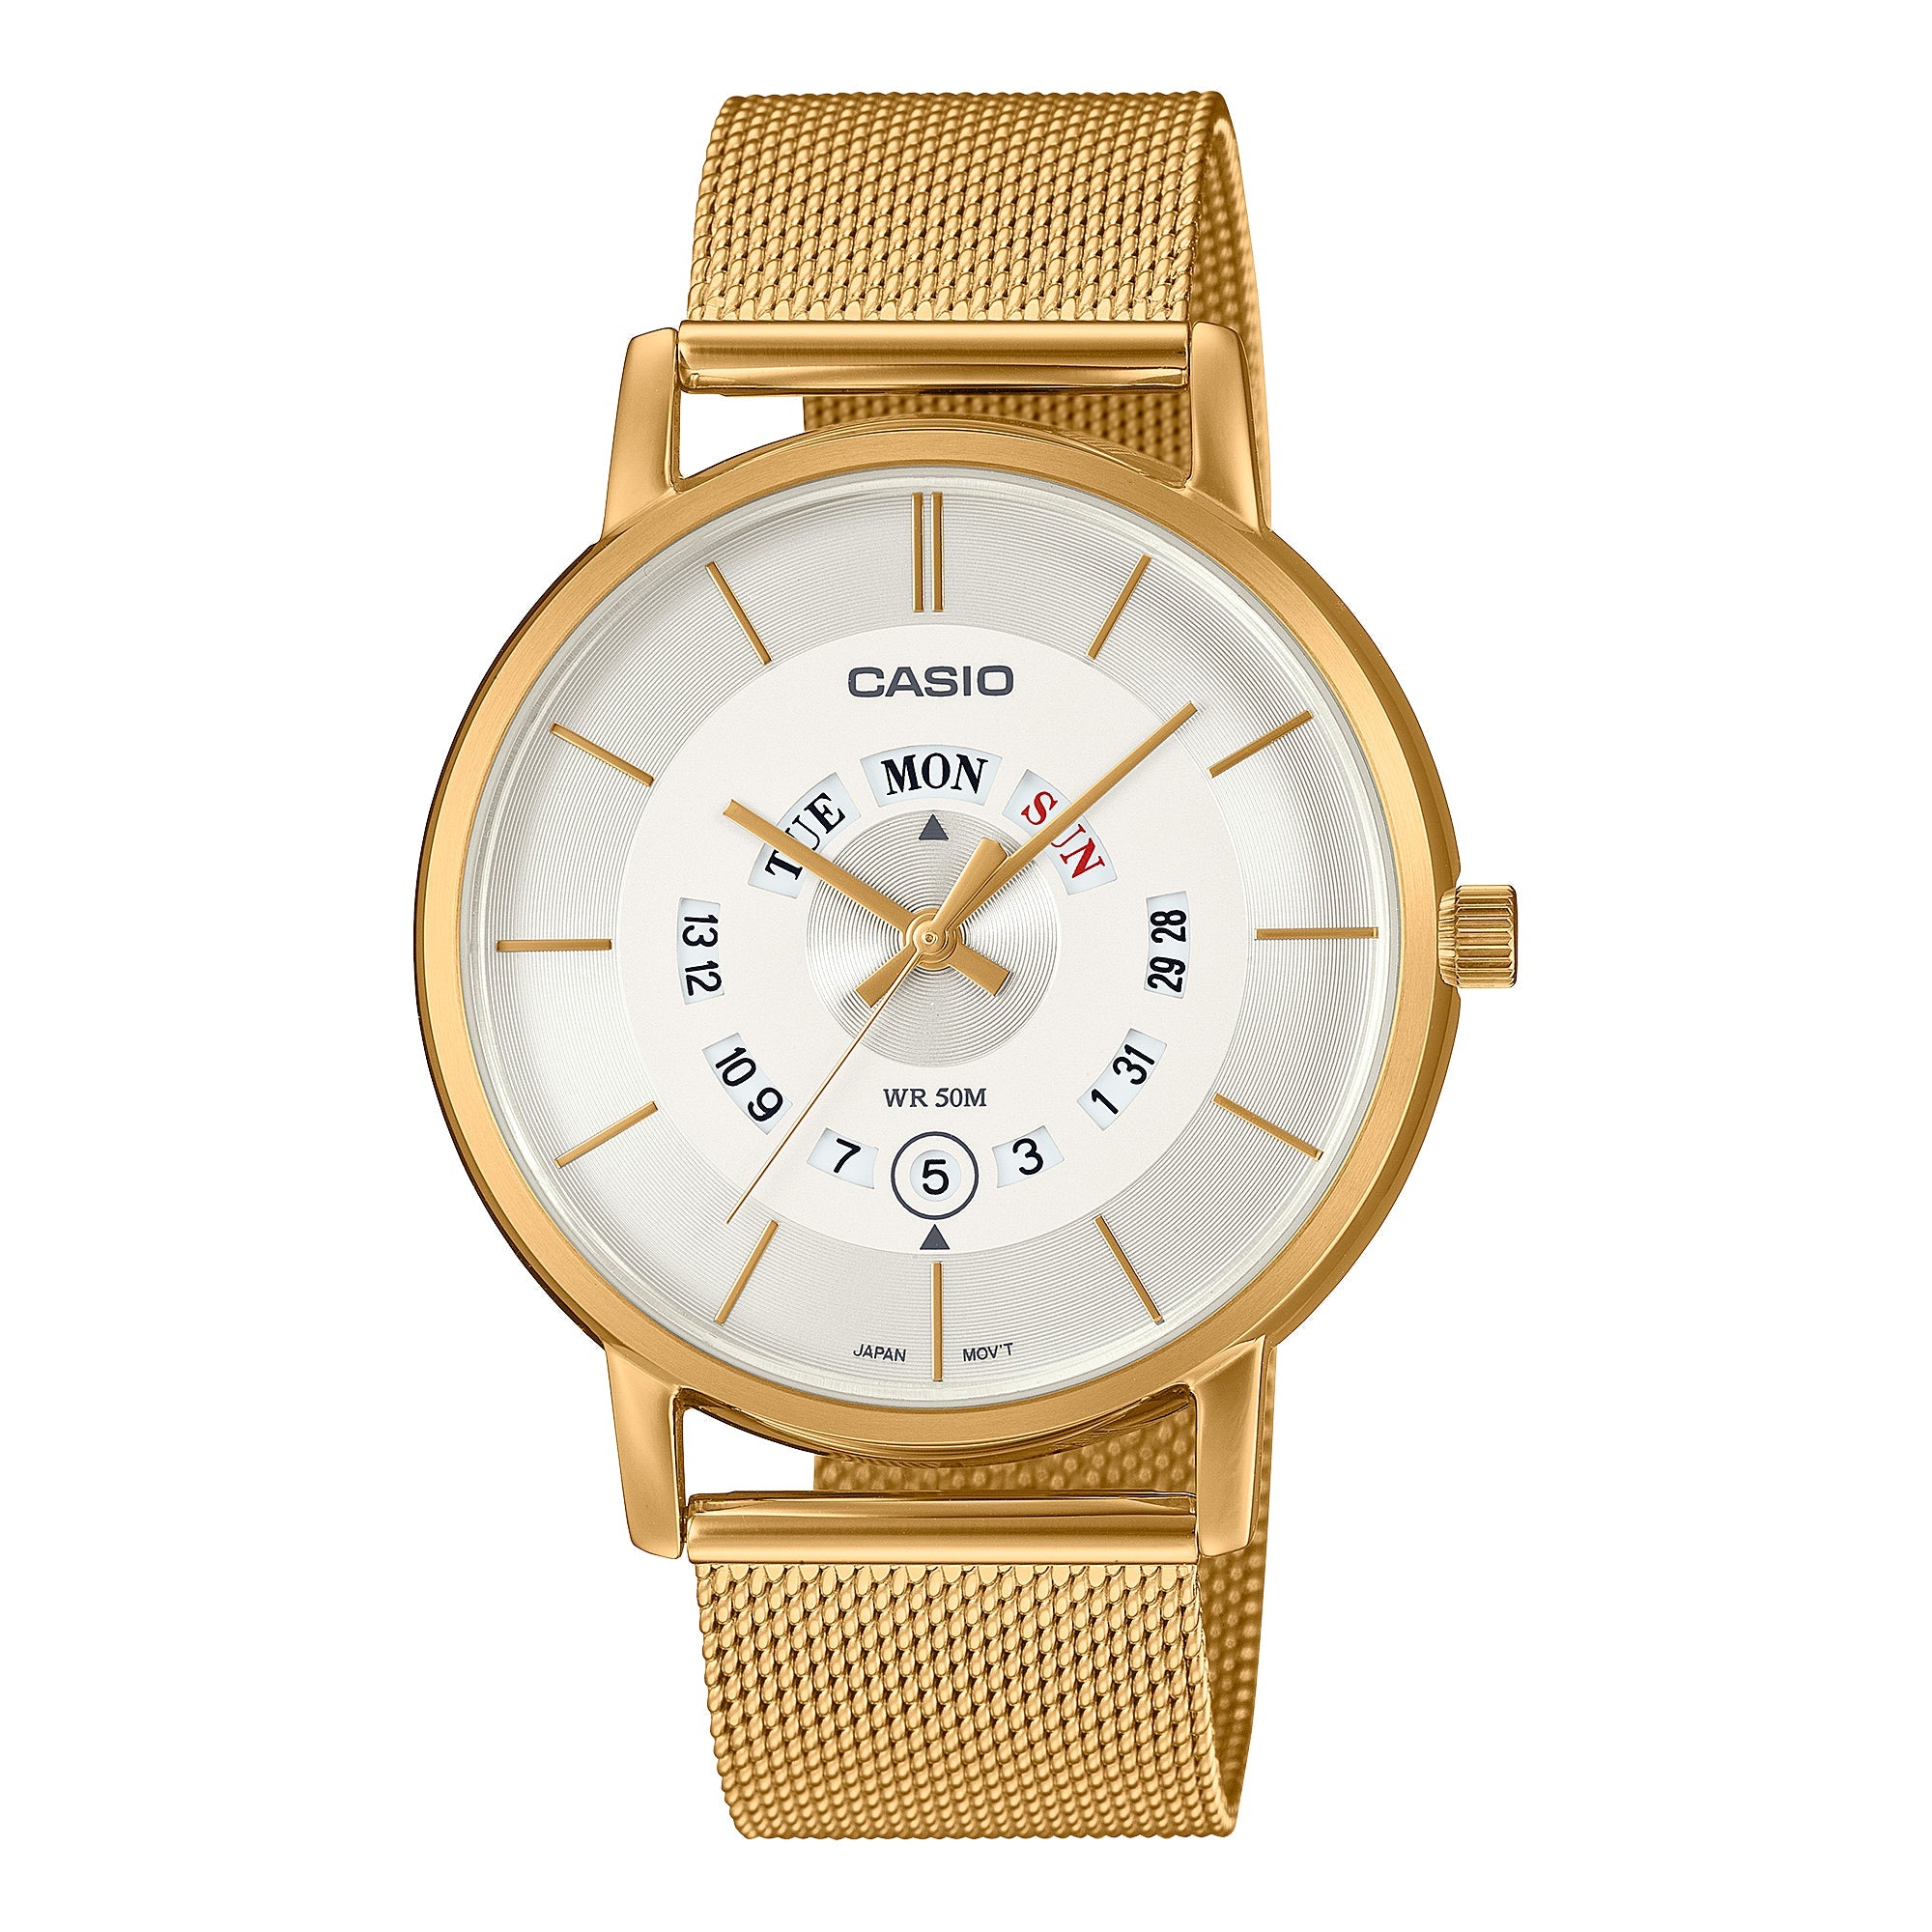 Casio Men's Analog Gold Ion Plated Stainless Steel Mesh Band Watch MTPB135MG-7A MTP-B135MG-7A Watchspree